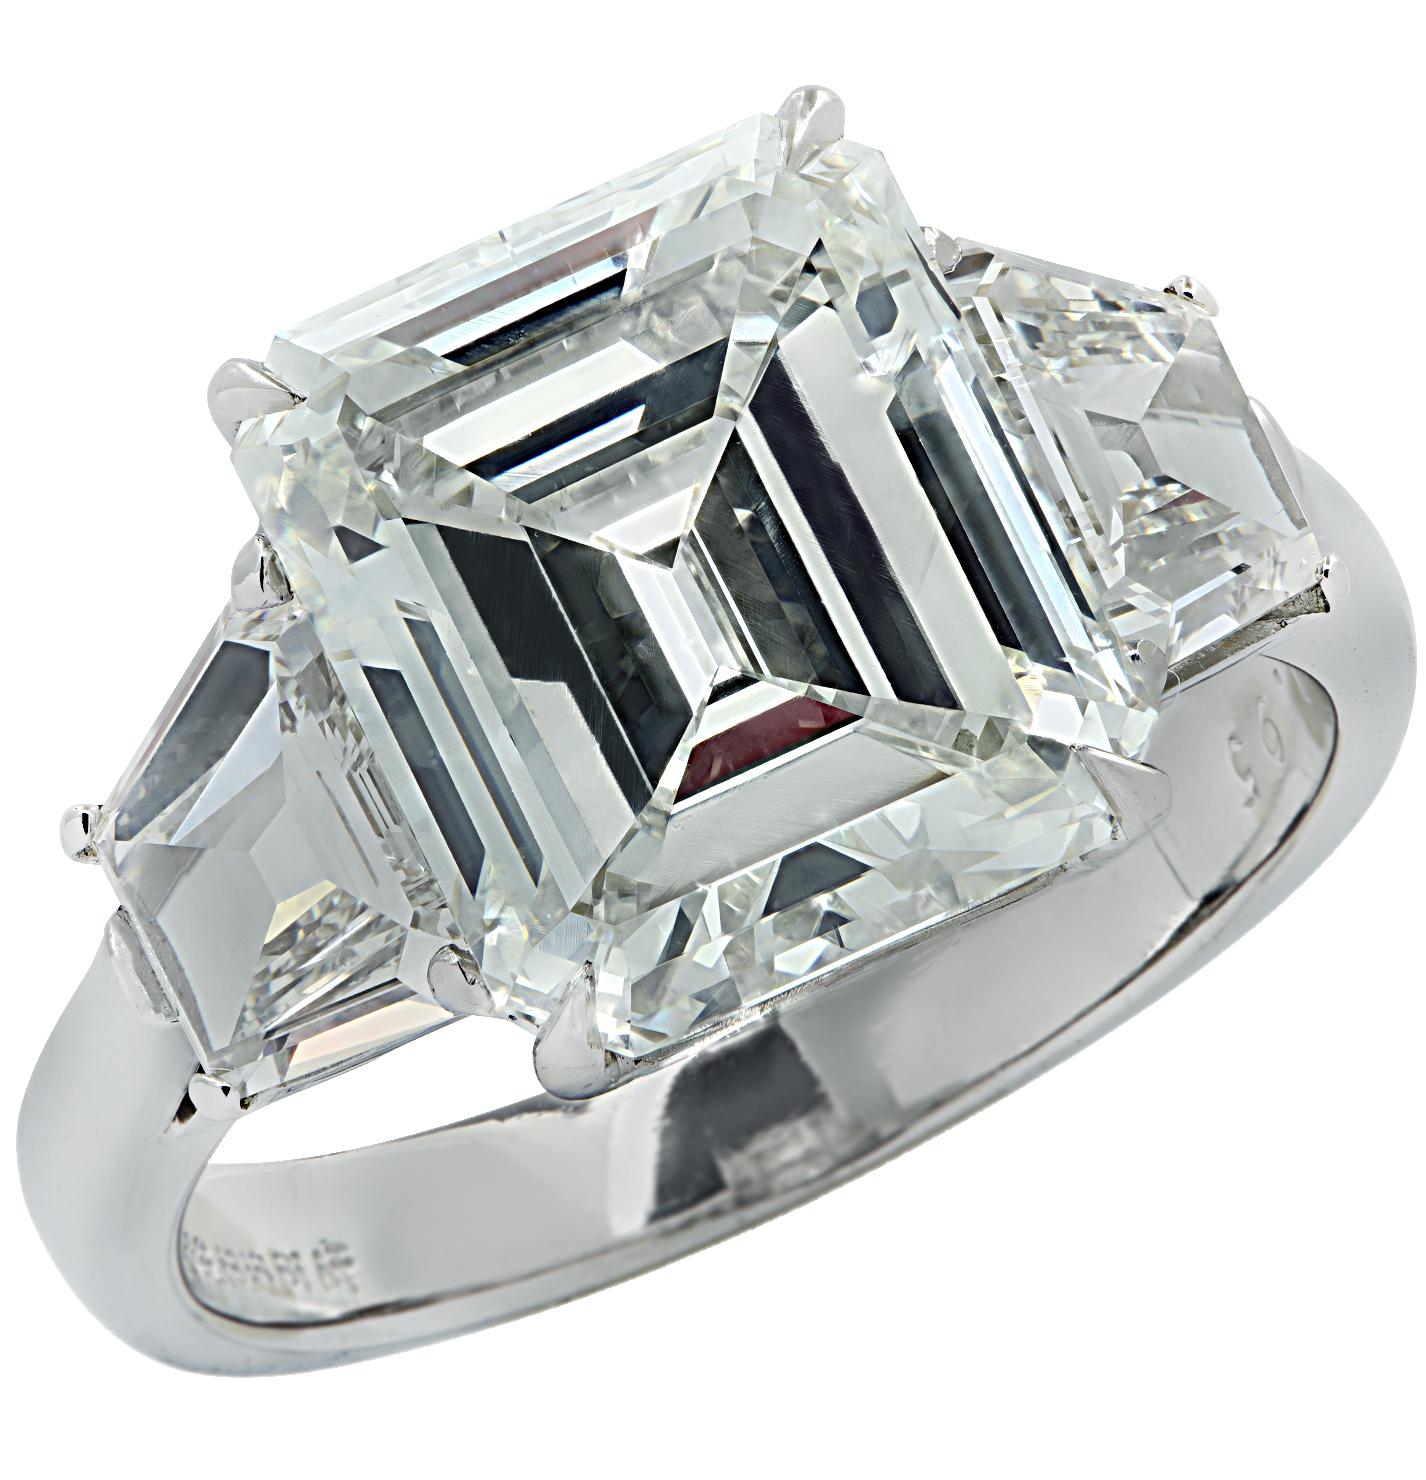 Vivid Diamonds GIA Certified 7.01 Carat Emerald Cut Diamond Engagement Ring In New Condition For Sale In Miami, FL